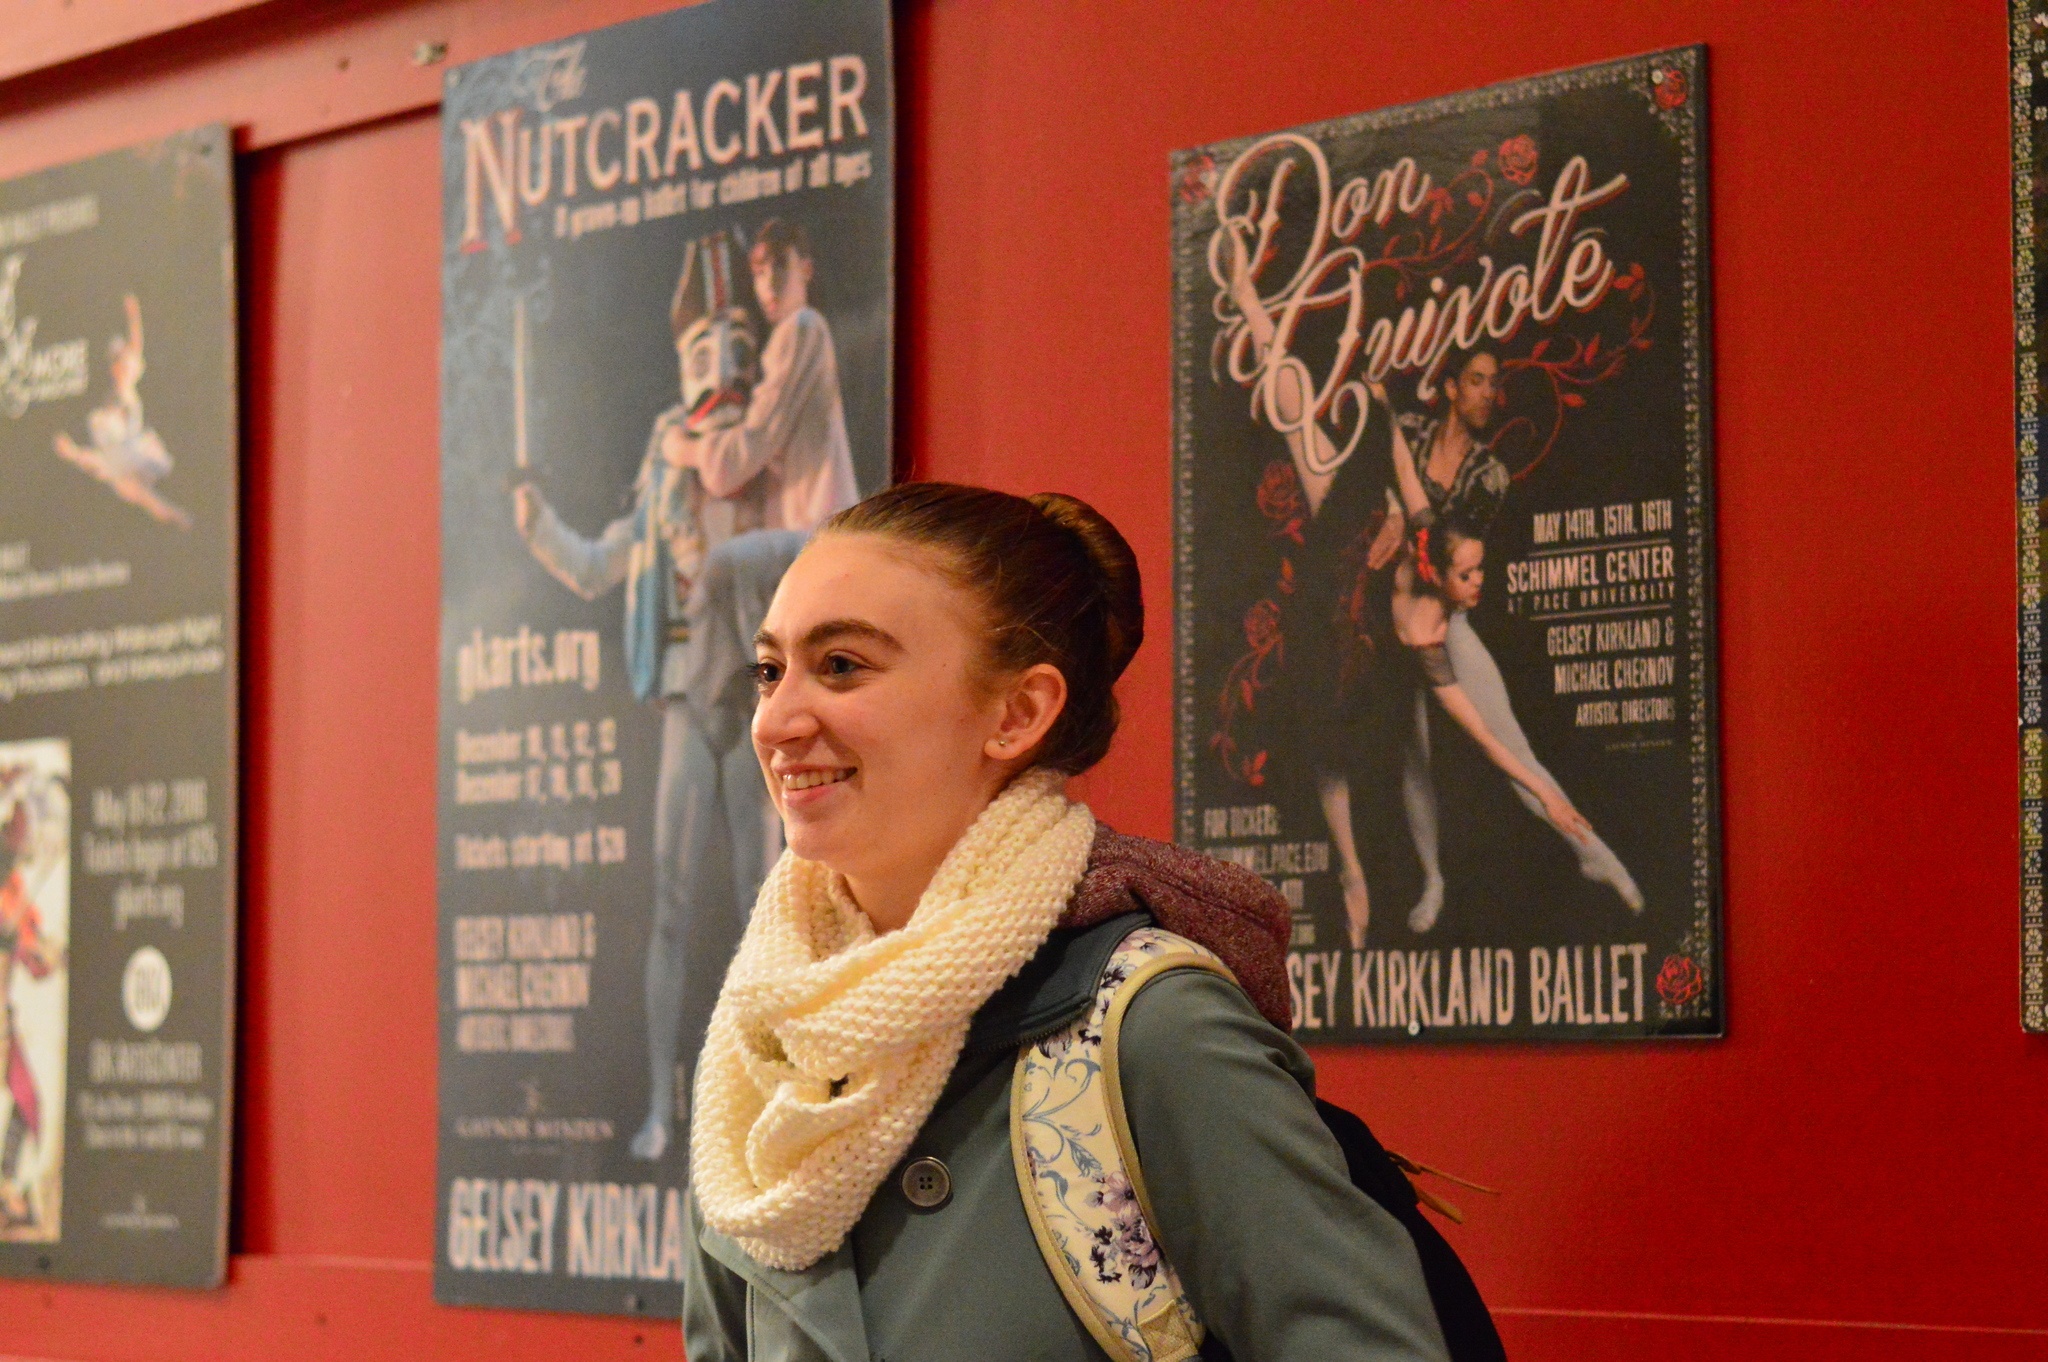 Cami Ortloff pauses in the hallway of Brooklyn’s Gelsey Kirkland Academy, where she will dance in “The Nutcracker” next month. (Diane Urbani de la Paz/For Peninsula Daily News)